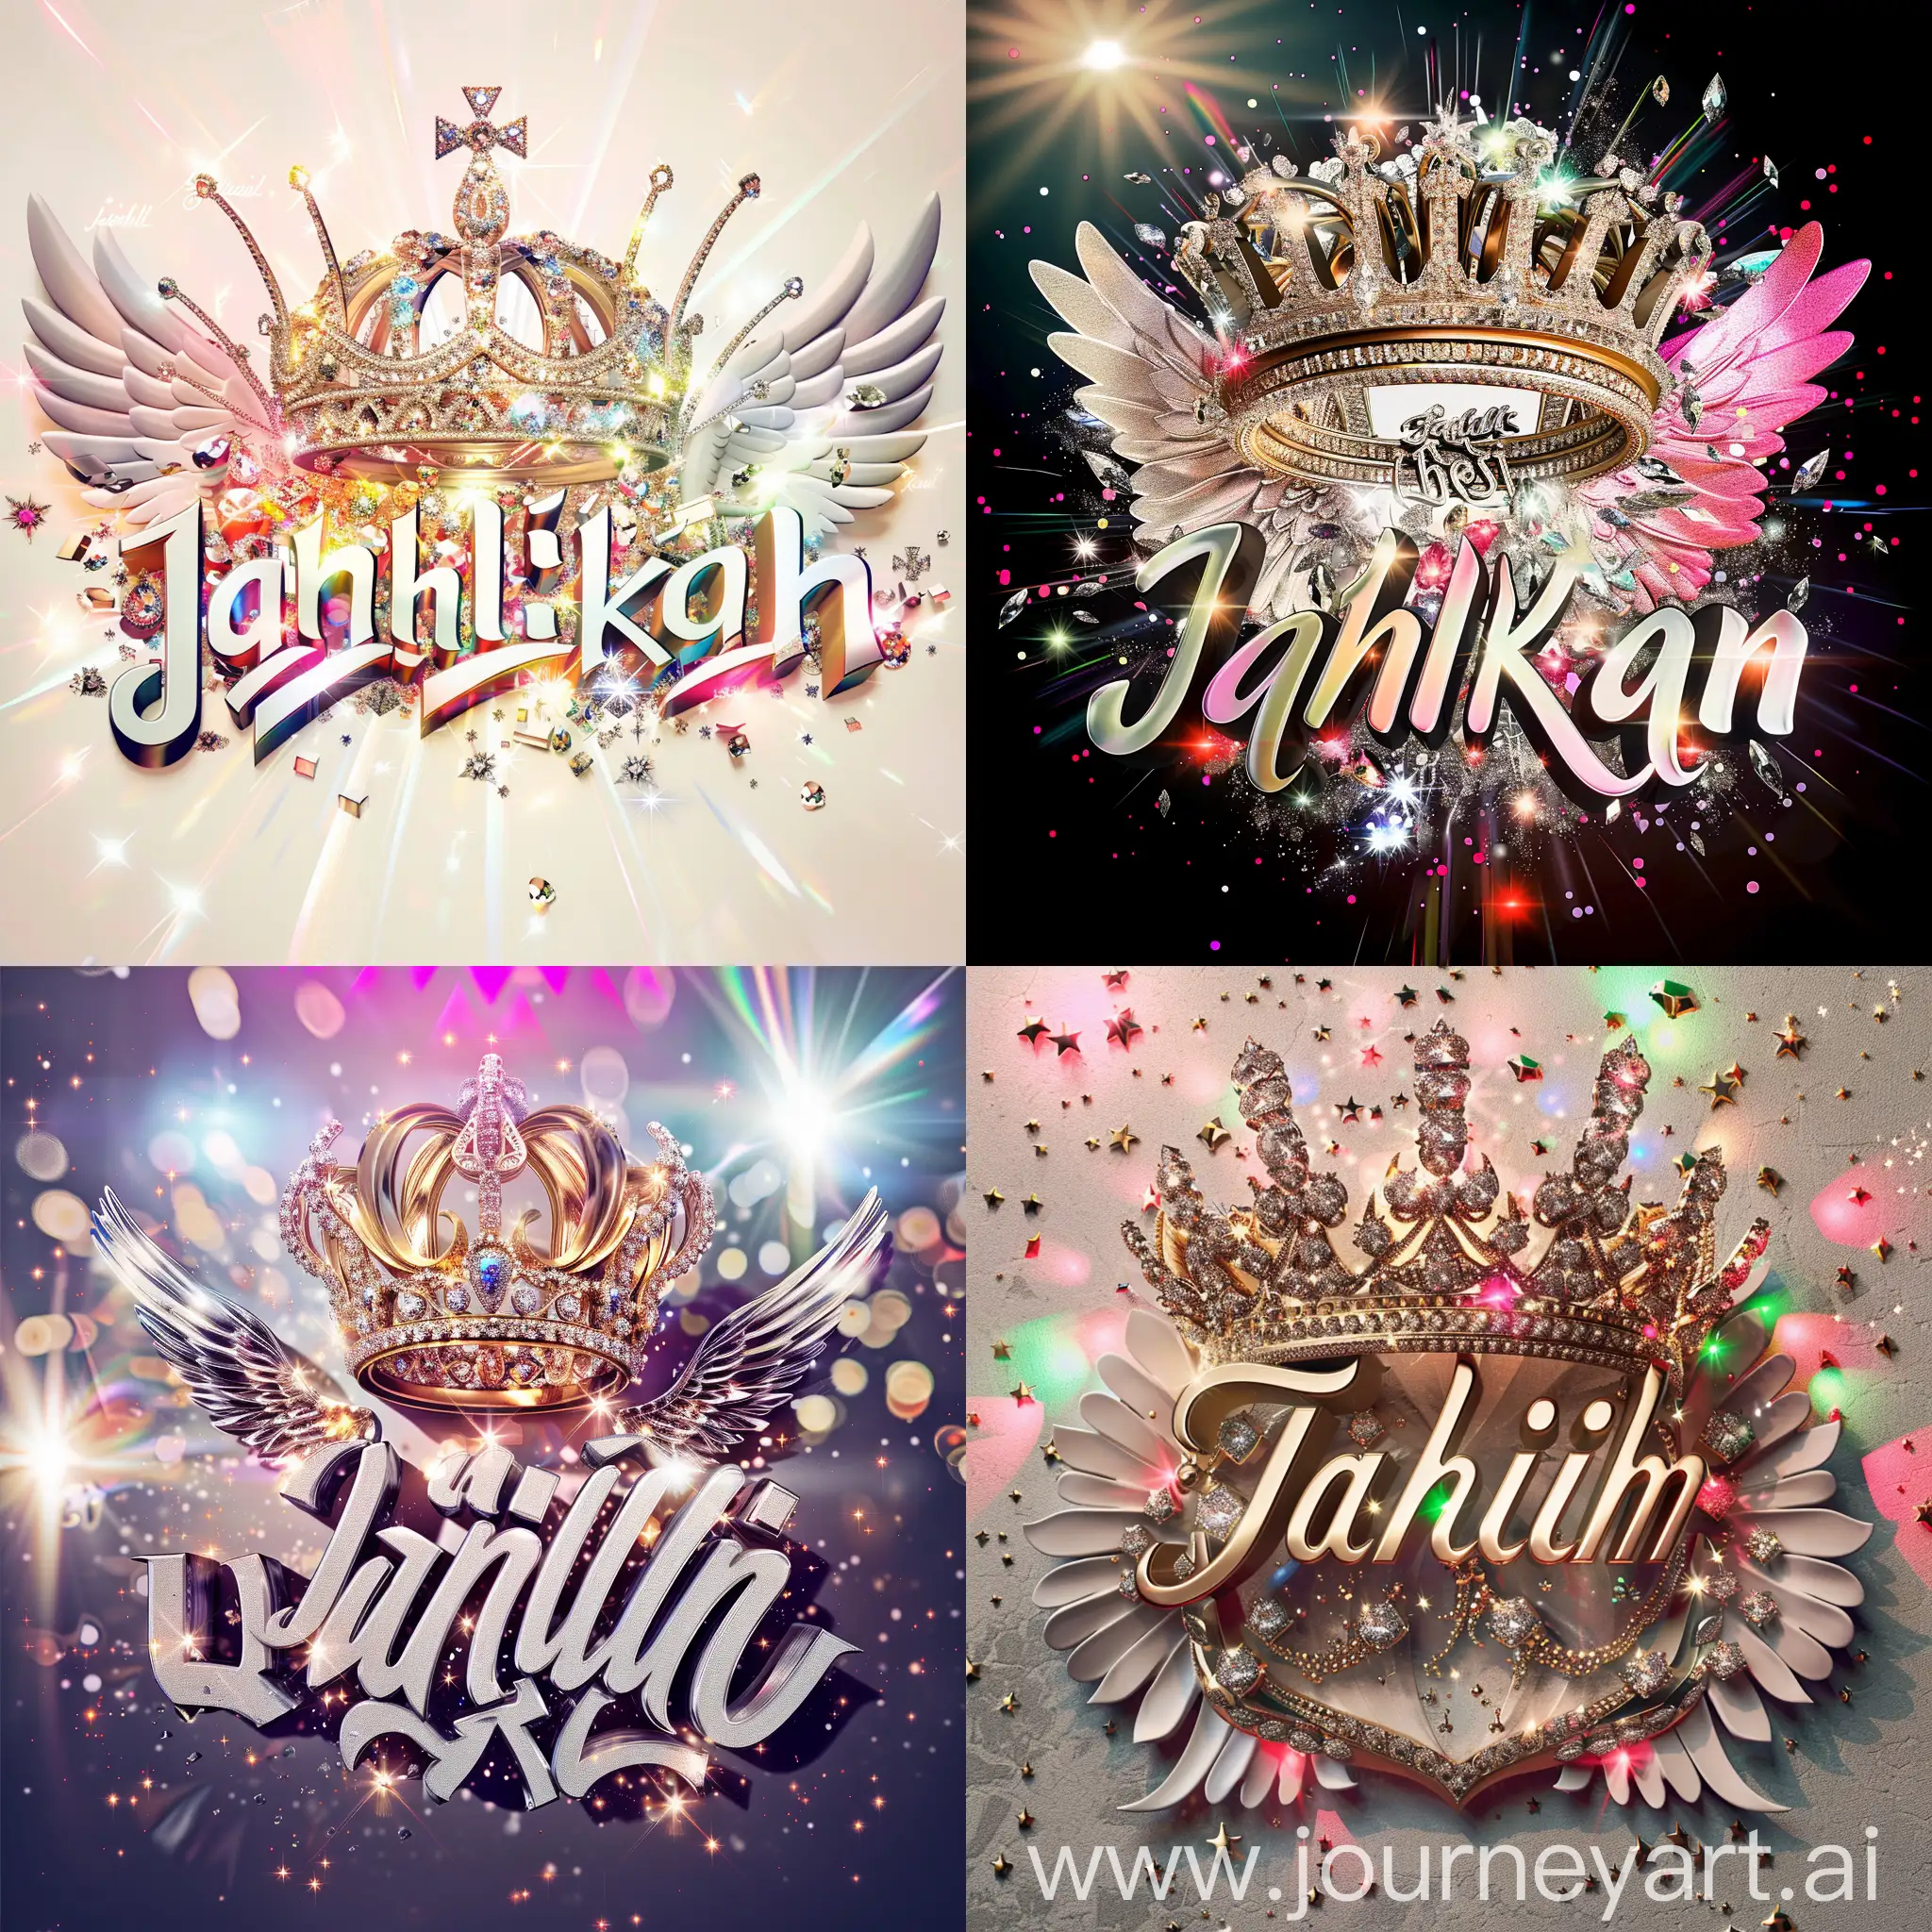 Elegant-3D-Typography-Portrait-Jahil-Khan-with-Crown-Diamonds-and-Angel-Wings